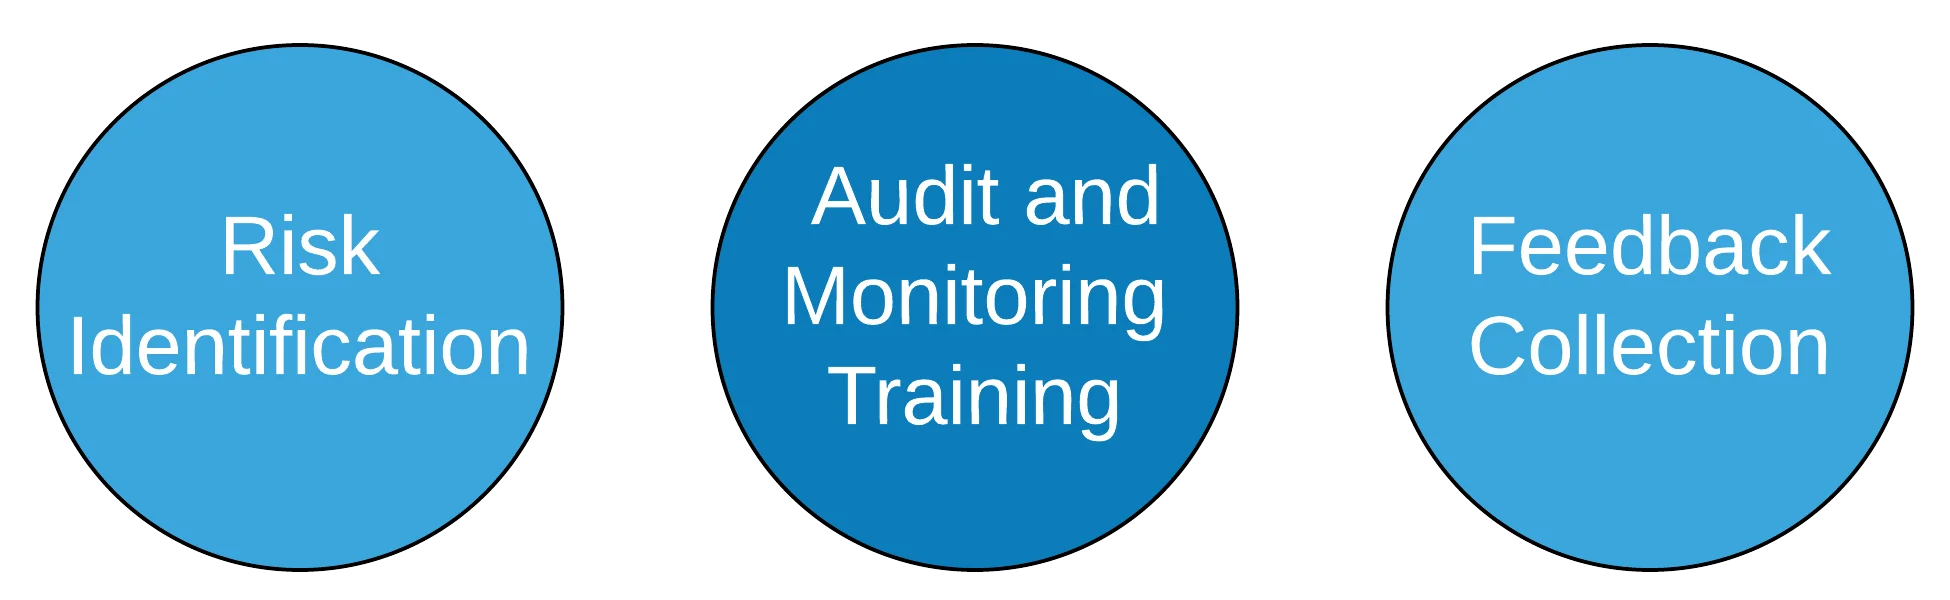 Descriptive image with three circles that read, Risk Identification, Audit and monitoring training, Feedback Collection